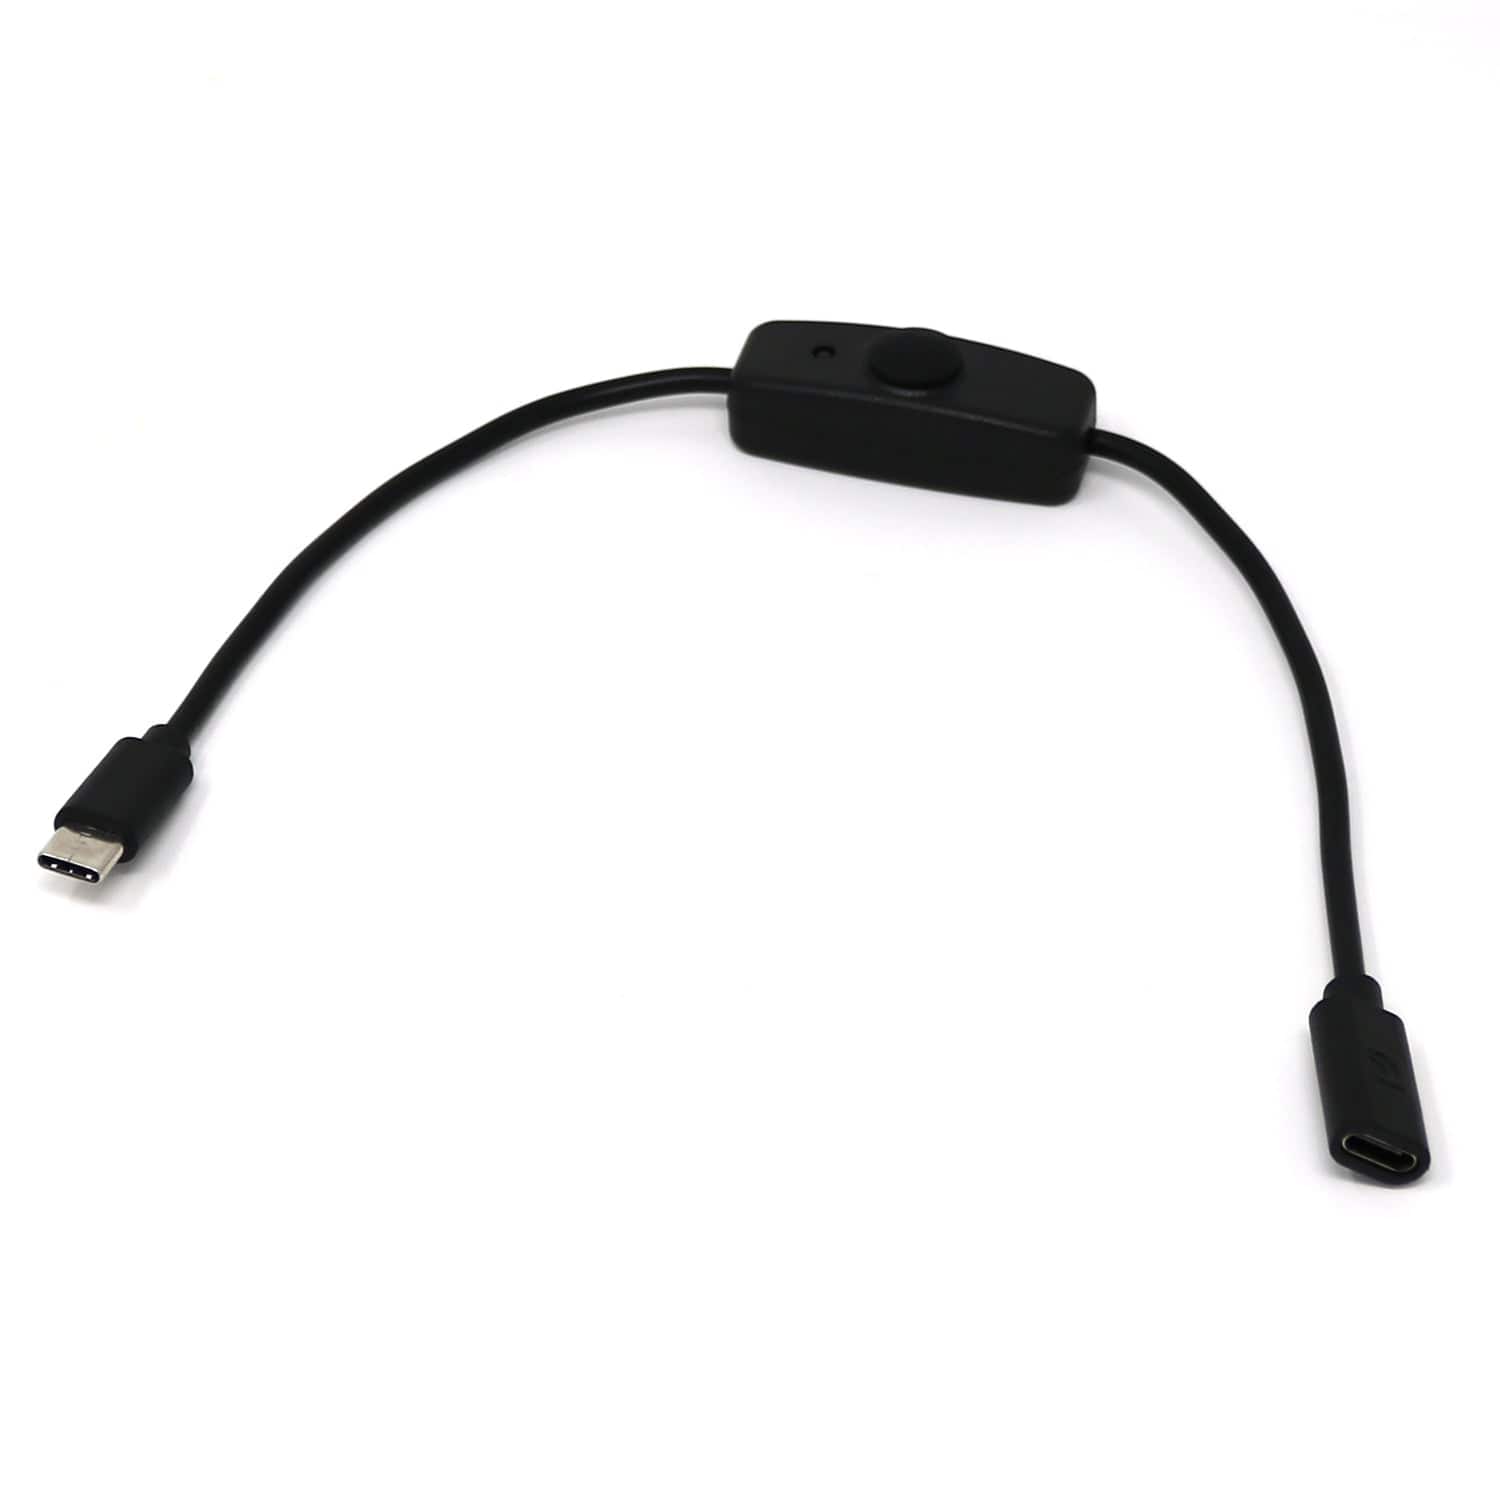 USB-C Cable with On/Off | The Pi Hut